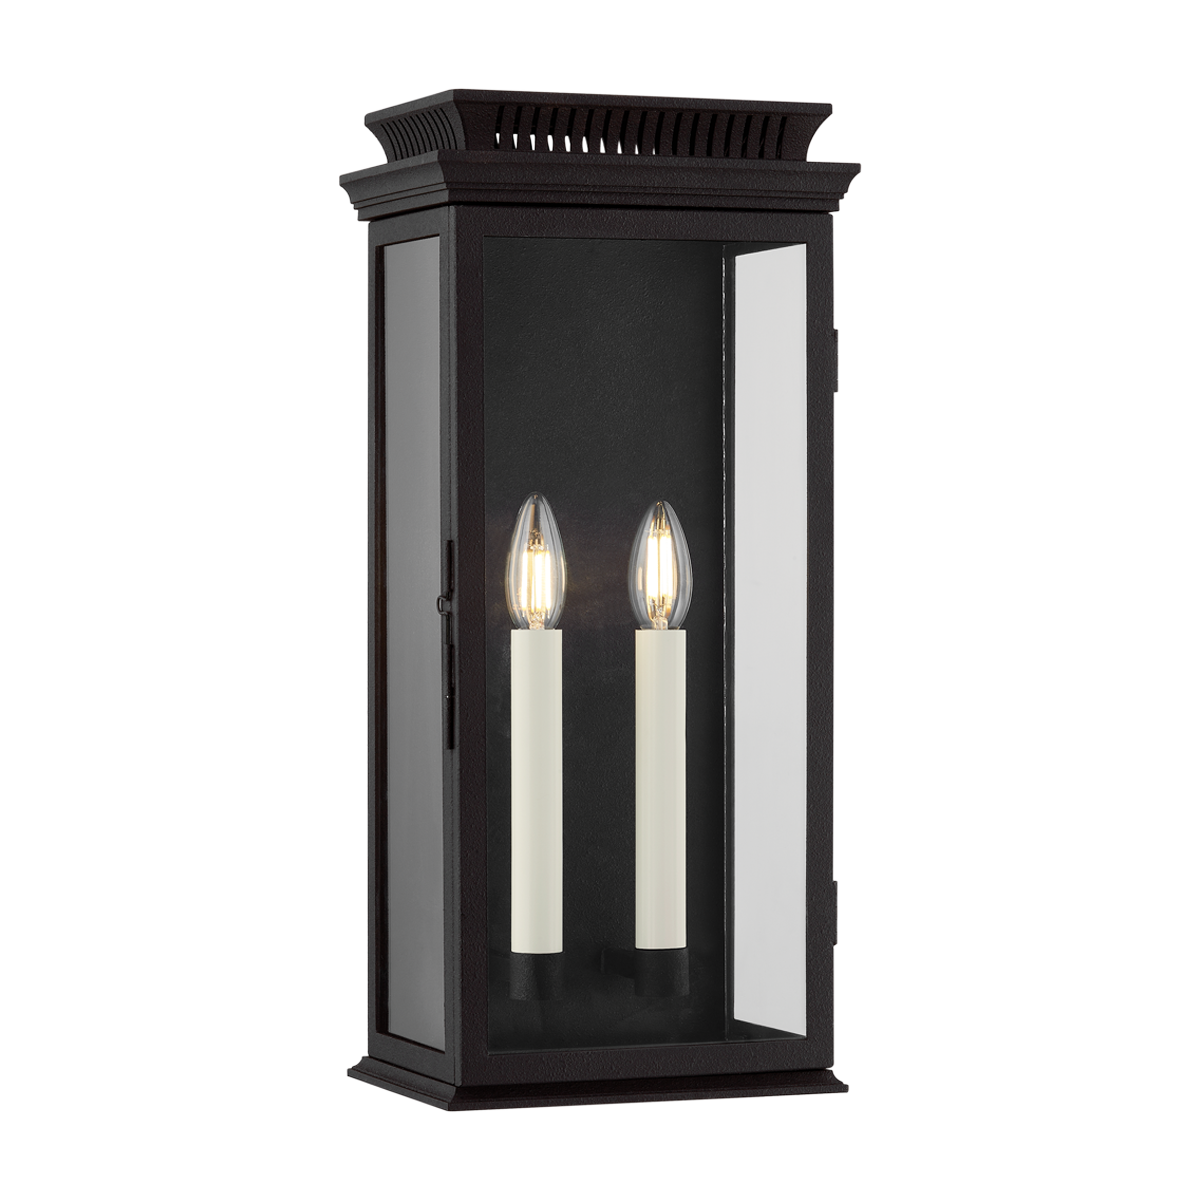 Louie Exterior Wall Sconce Large Wall Sconce 